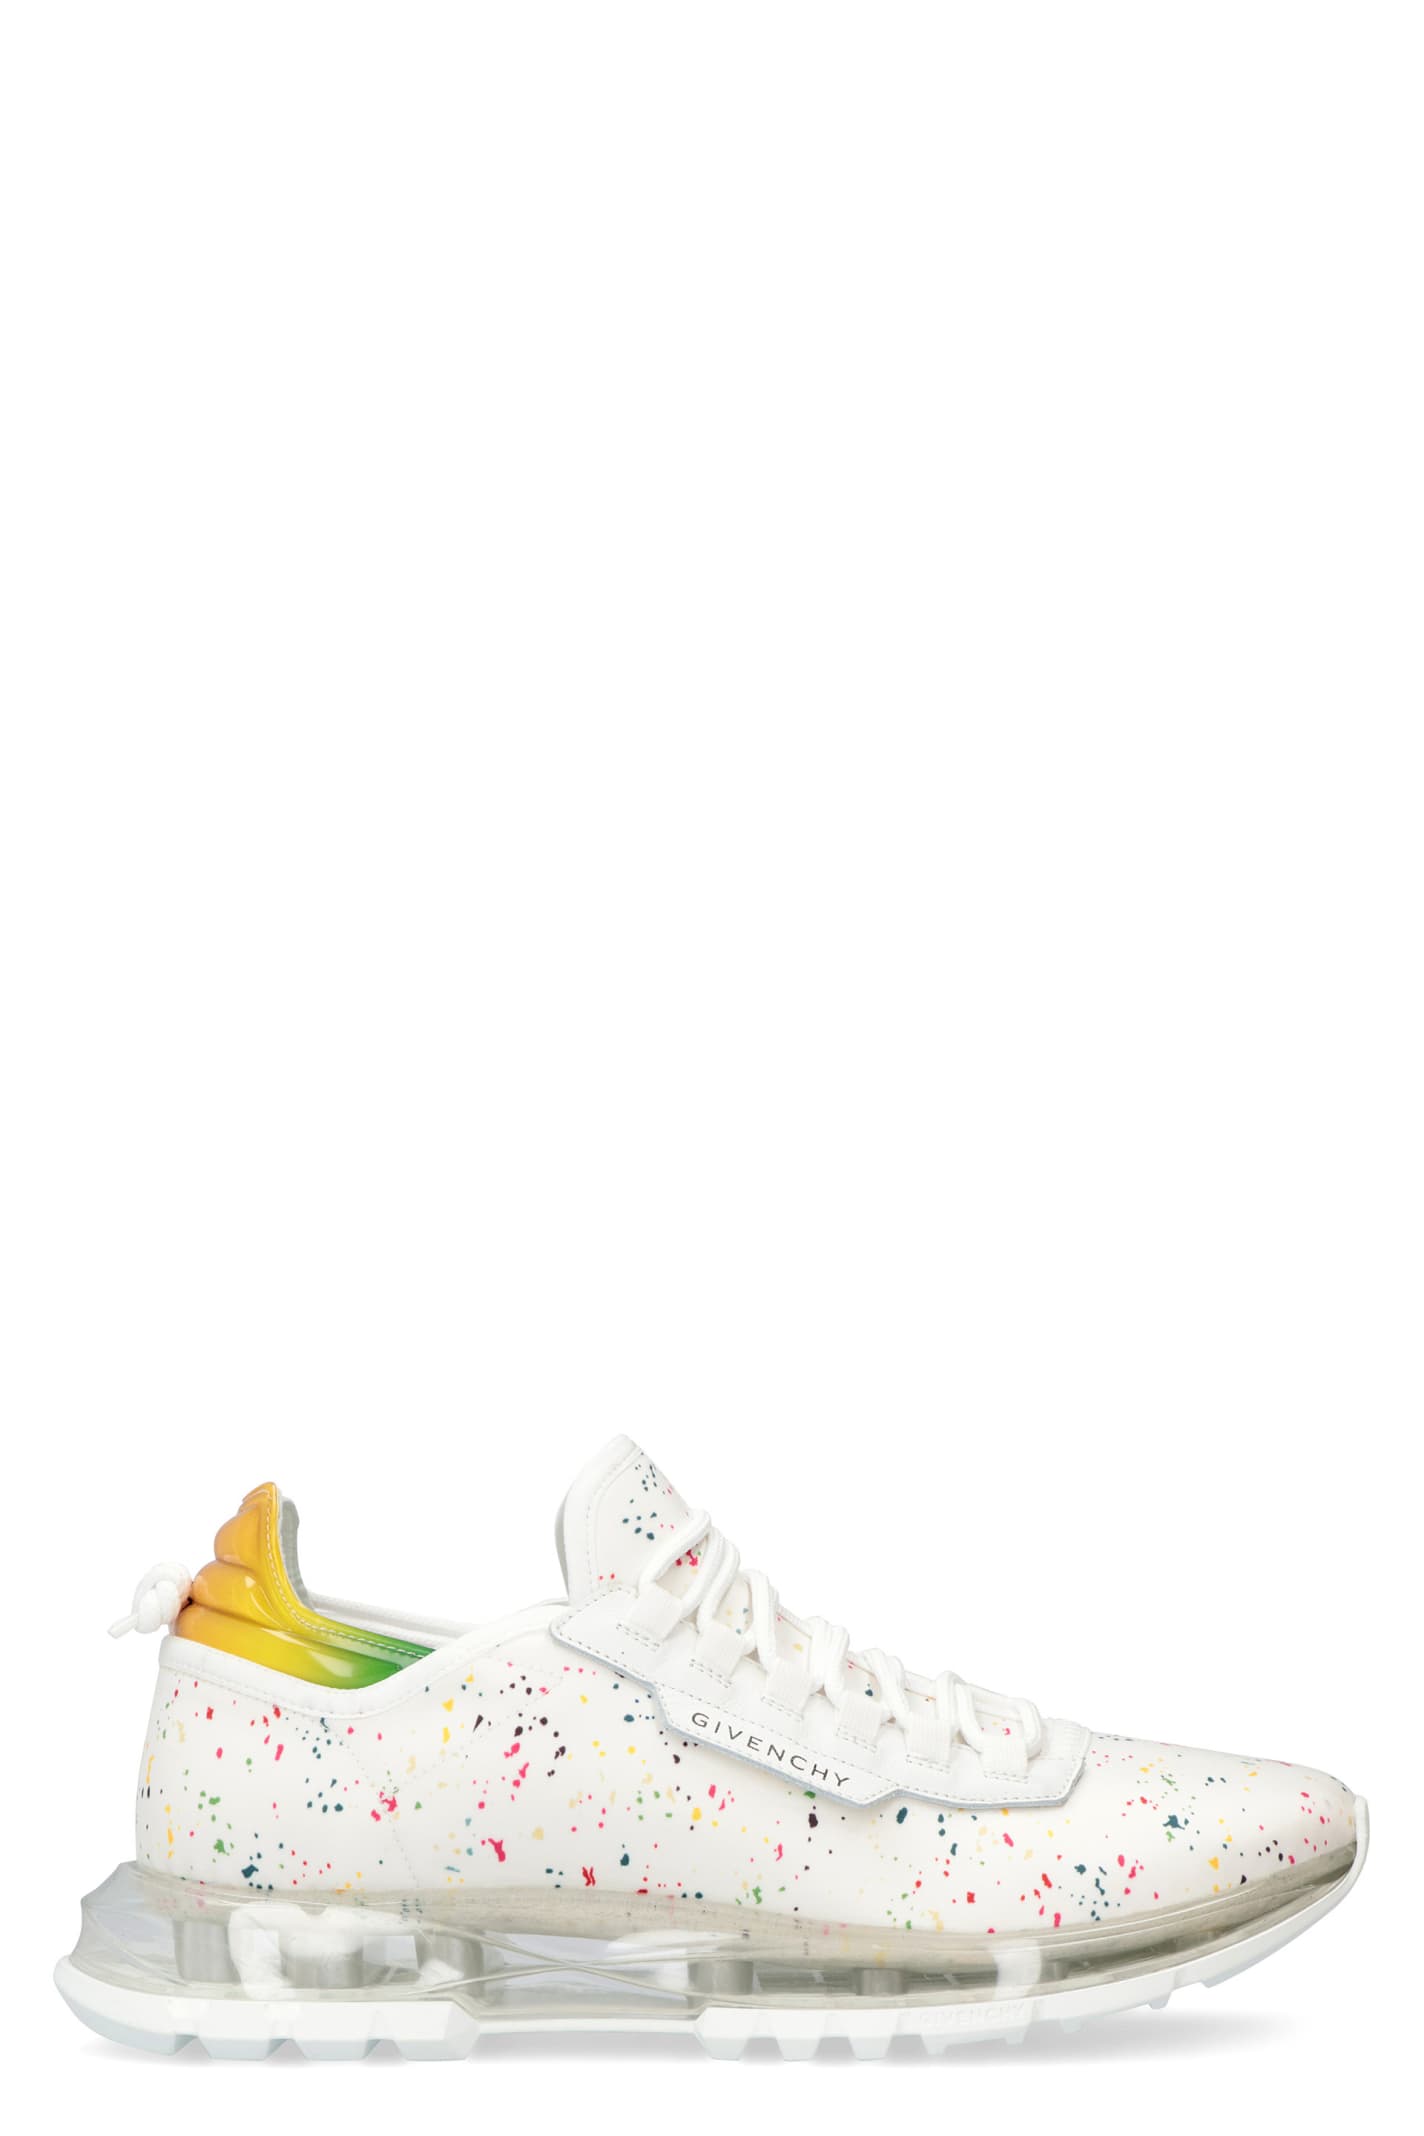 GIVENCHY SPECTRE PRINTED FABRIC SNEAKERS,BH003AH0TY 100